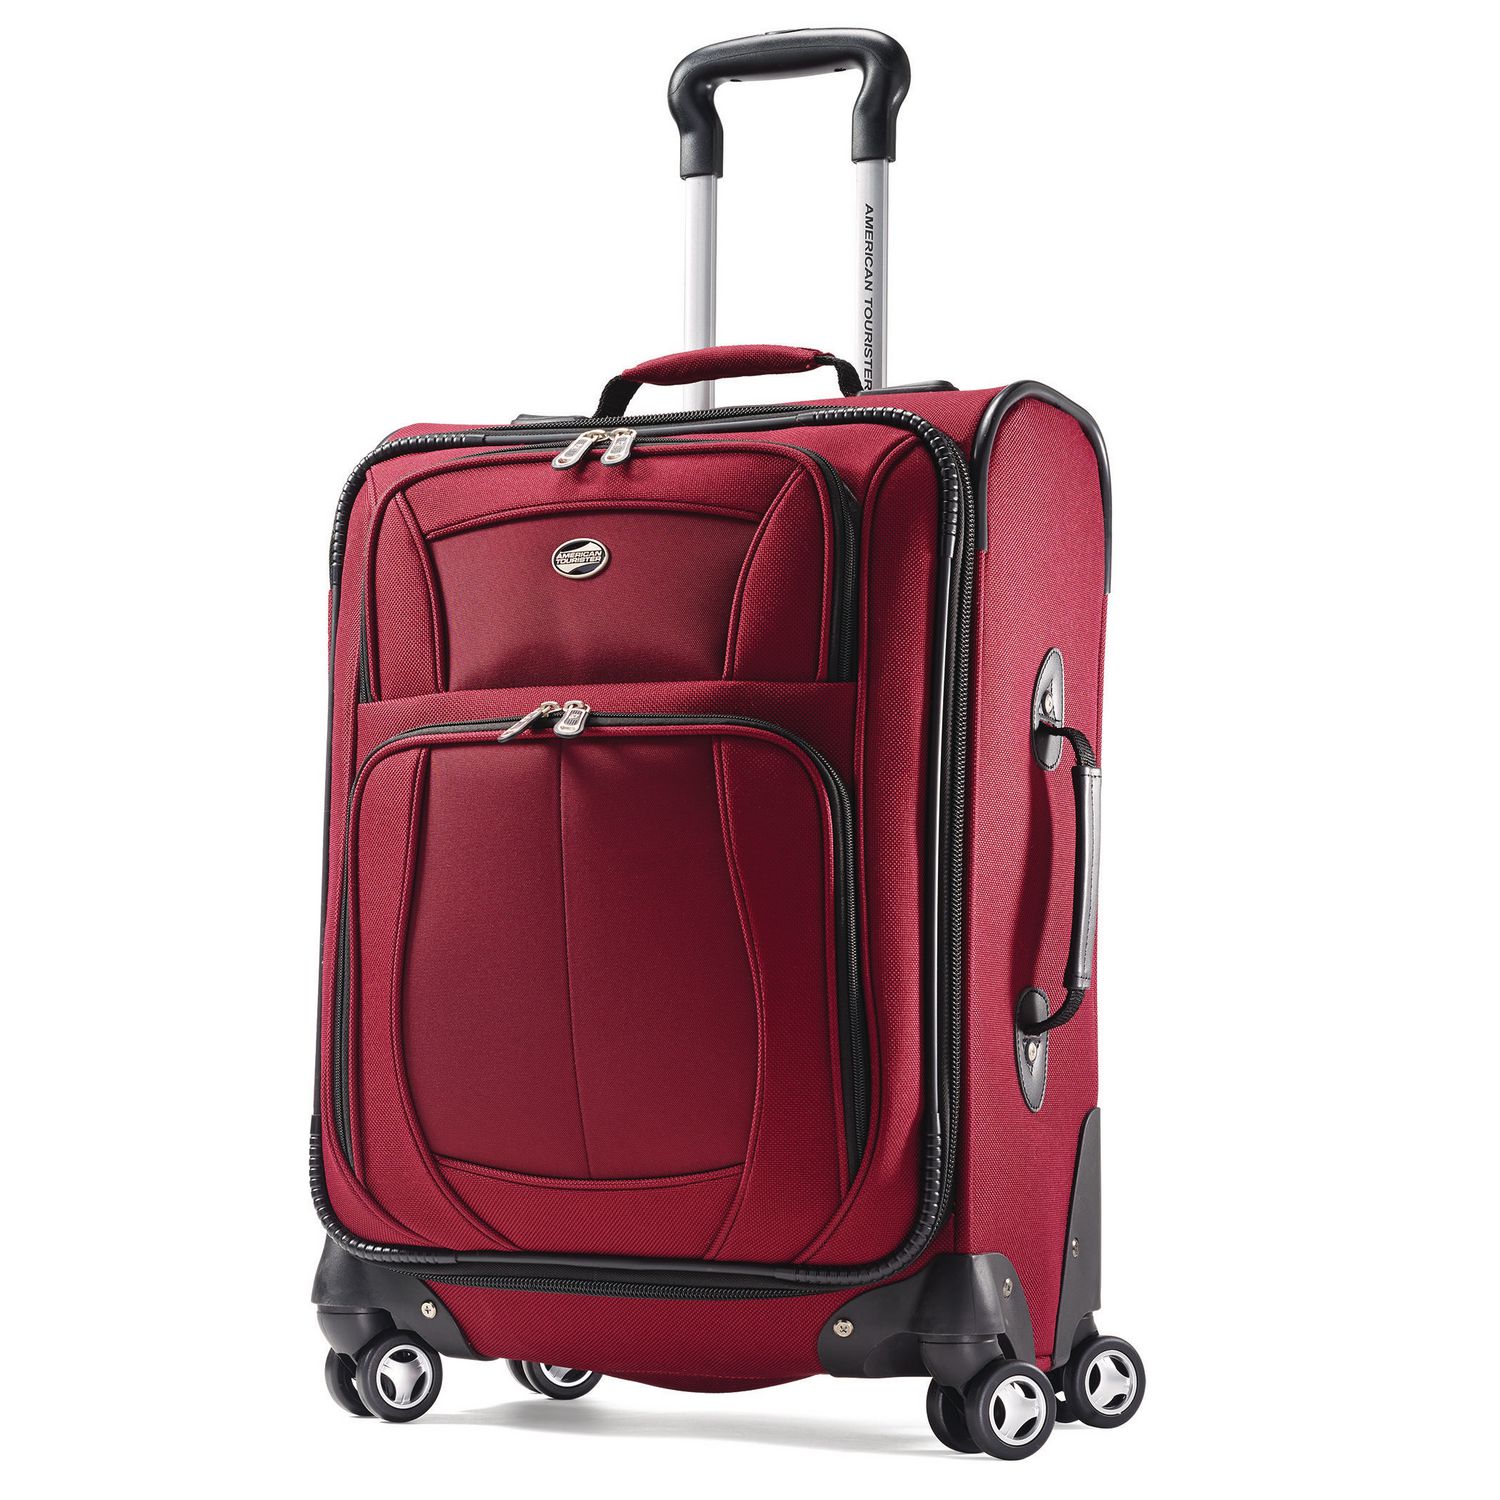 American Tourister Meridian Xlt Spinner Luggage | Walmart Canada